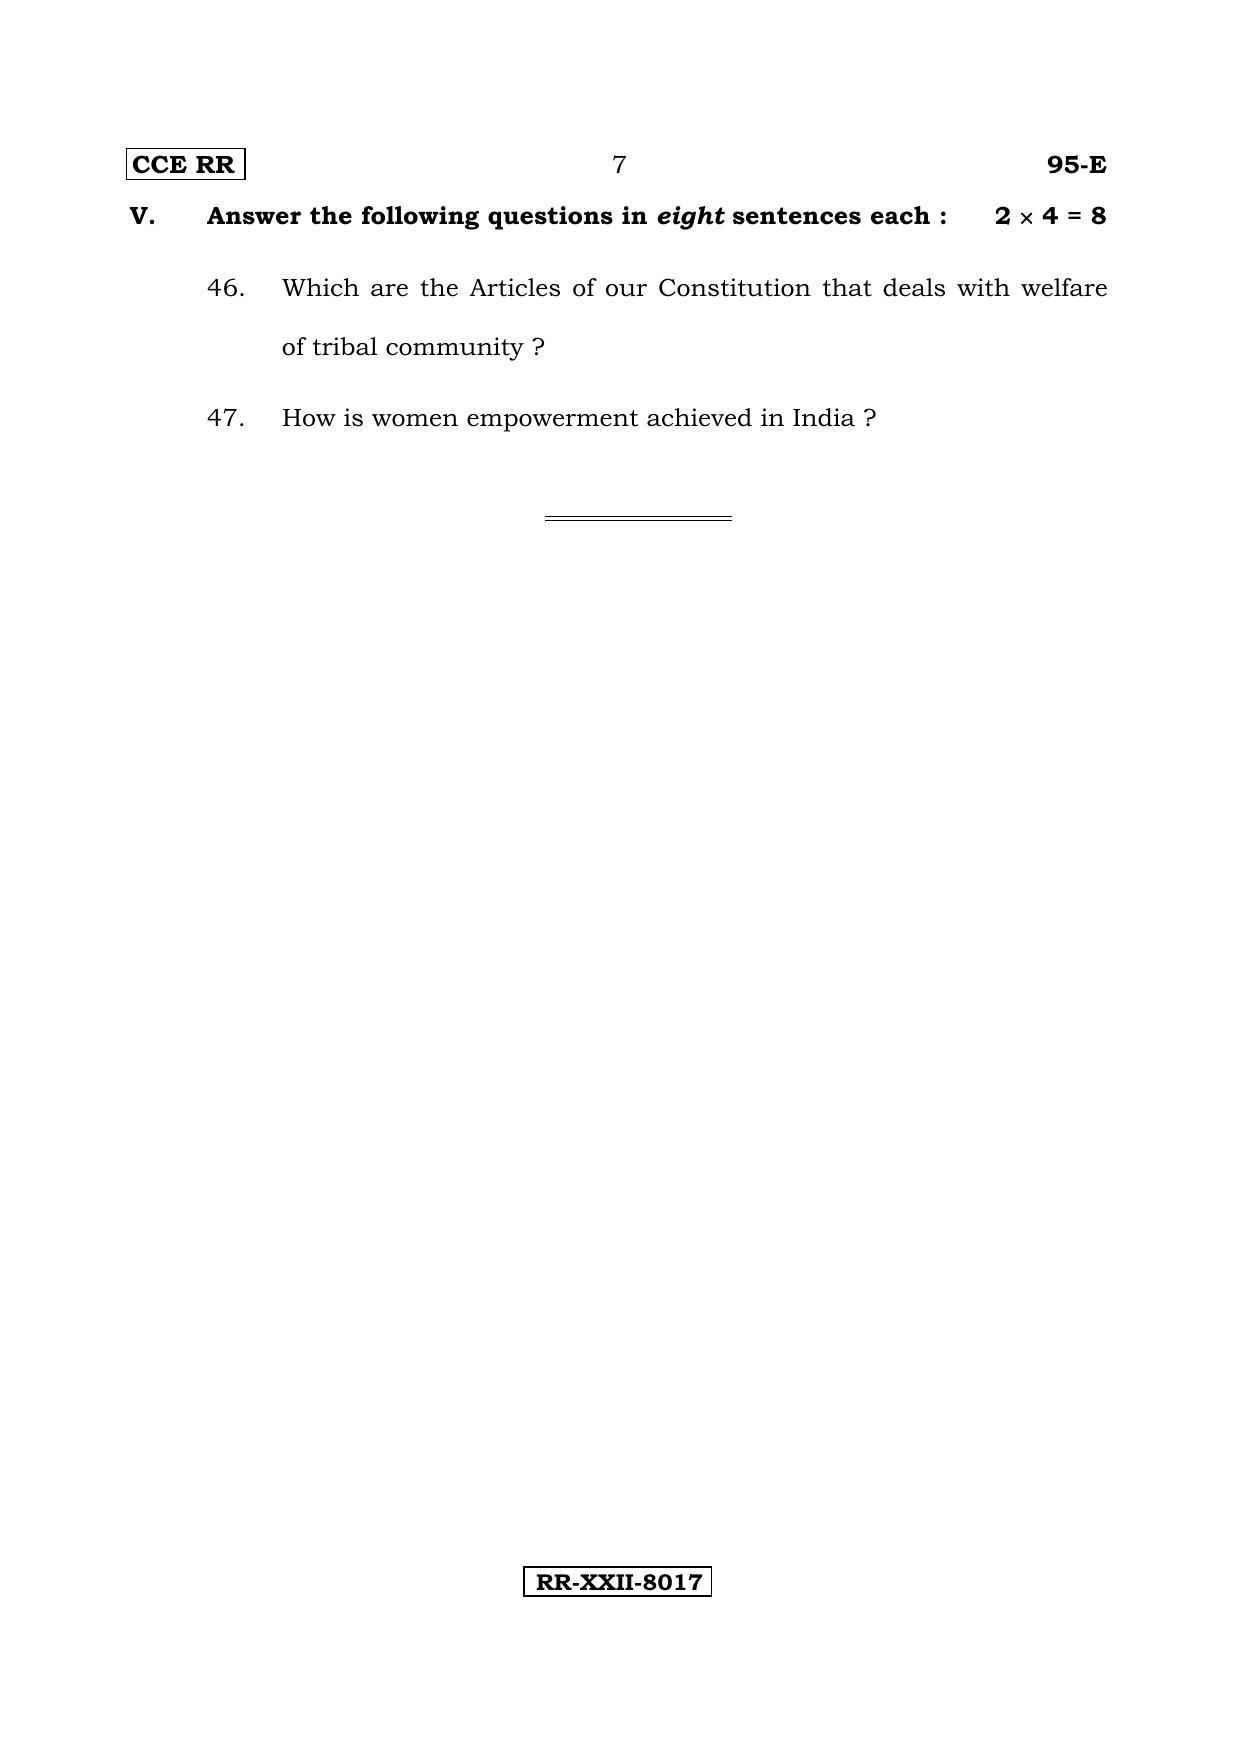 Karnataka SSLC SOCIOLOGY - ENGLISH (95-E CCE RR_sp1) (Supplementary) June 2017 Question Paper - Page 7